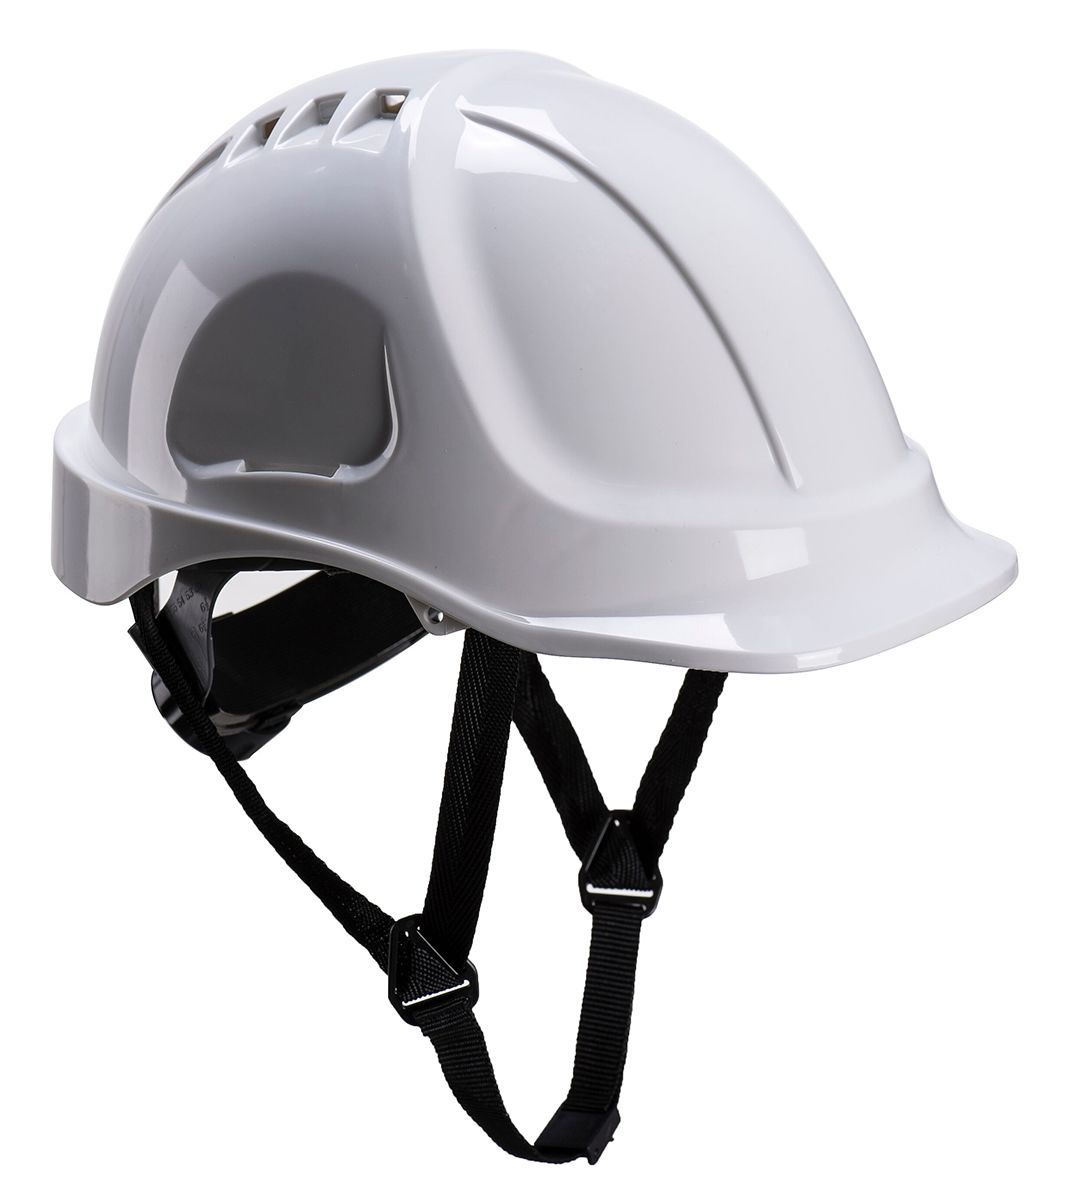 RS PRO White Safety Helmet with Chin Strap, Adjustable, Ventilated